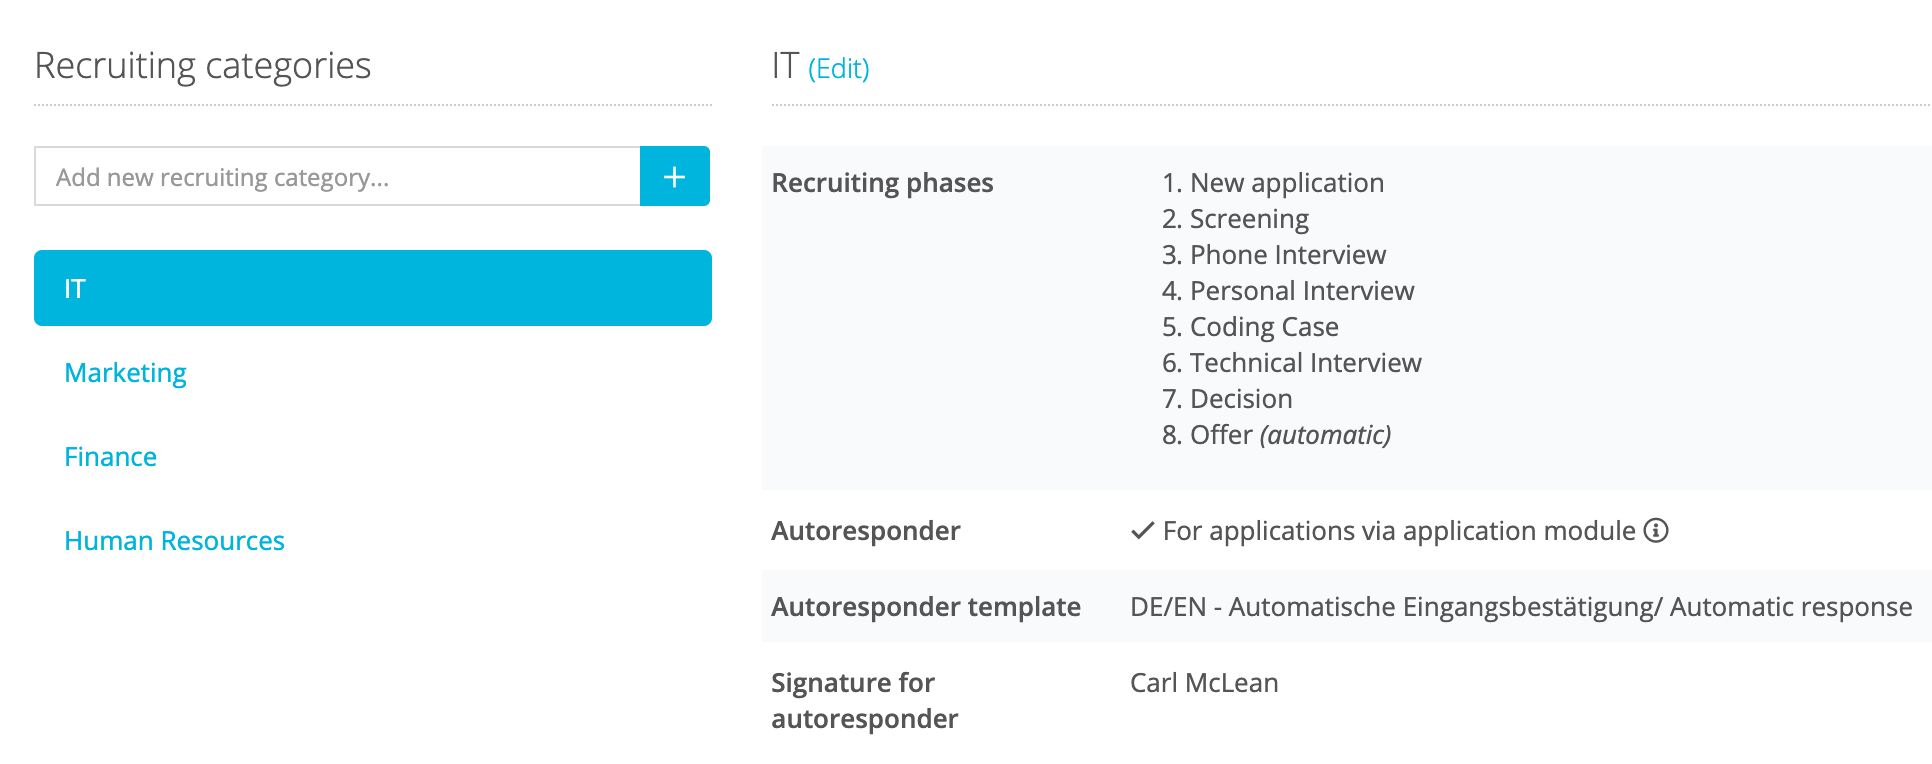 recruiting-categories-departments_nl.png